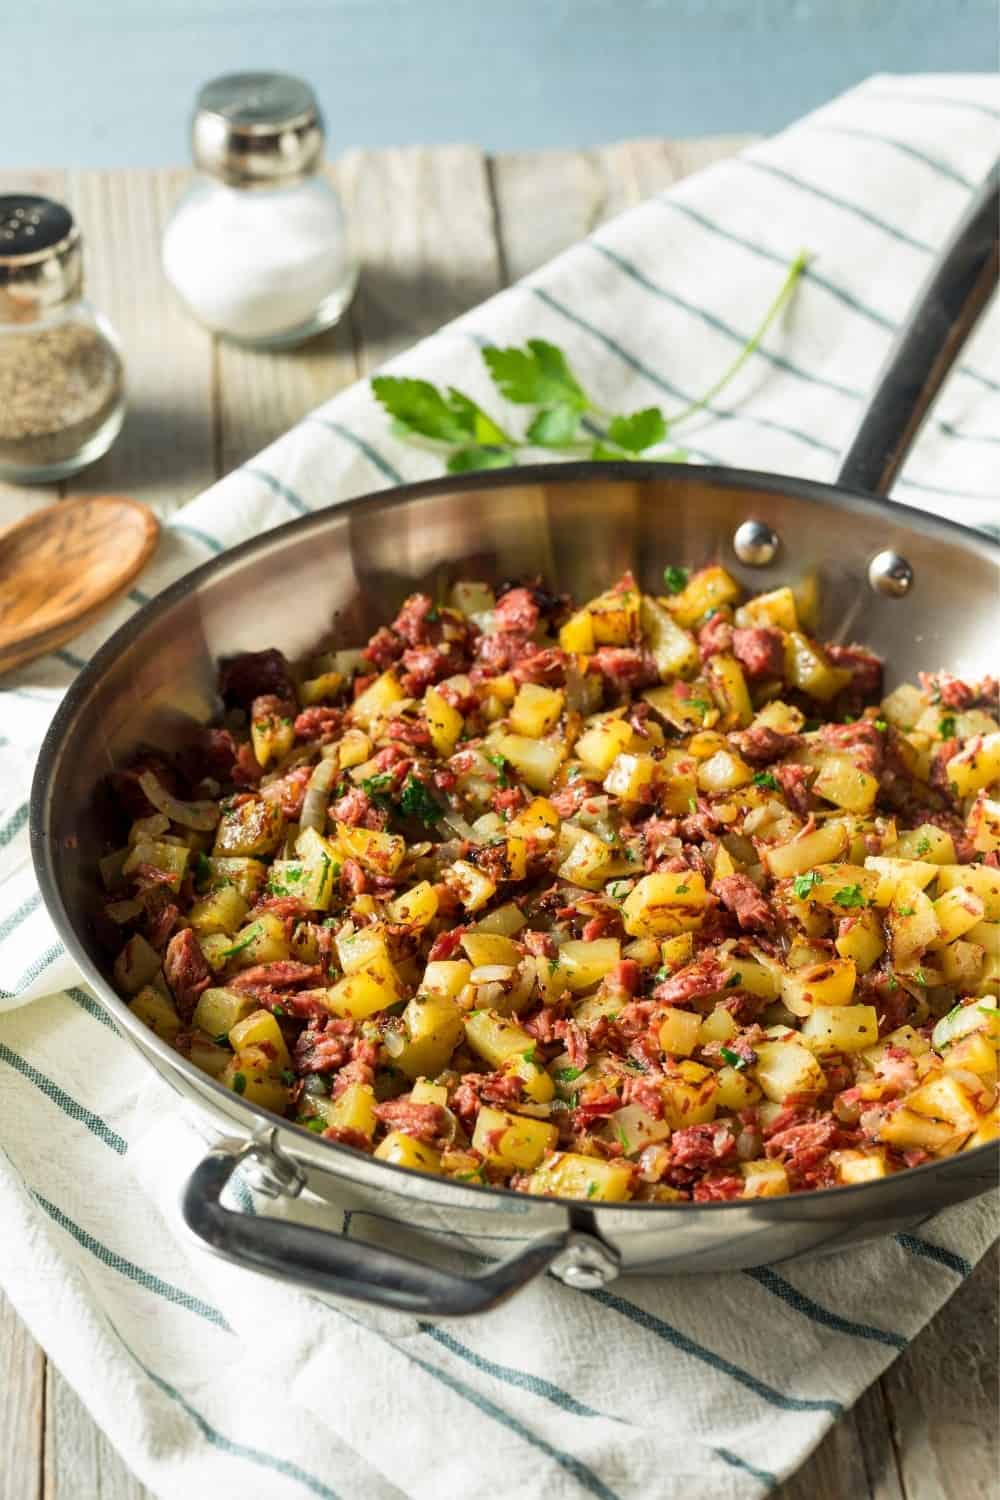 Canned Corned Beef Hash